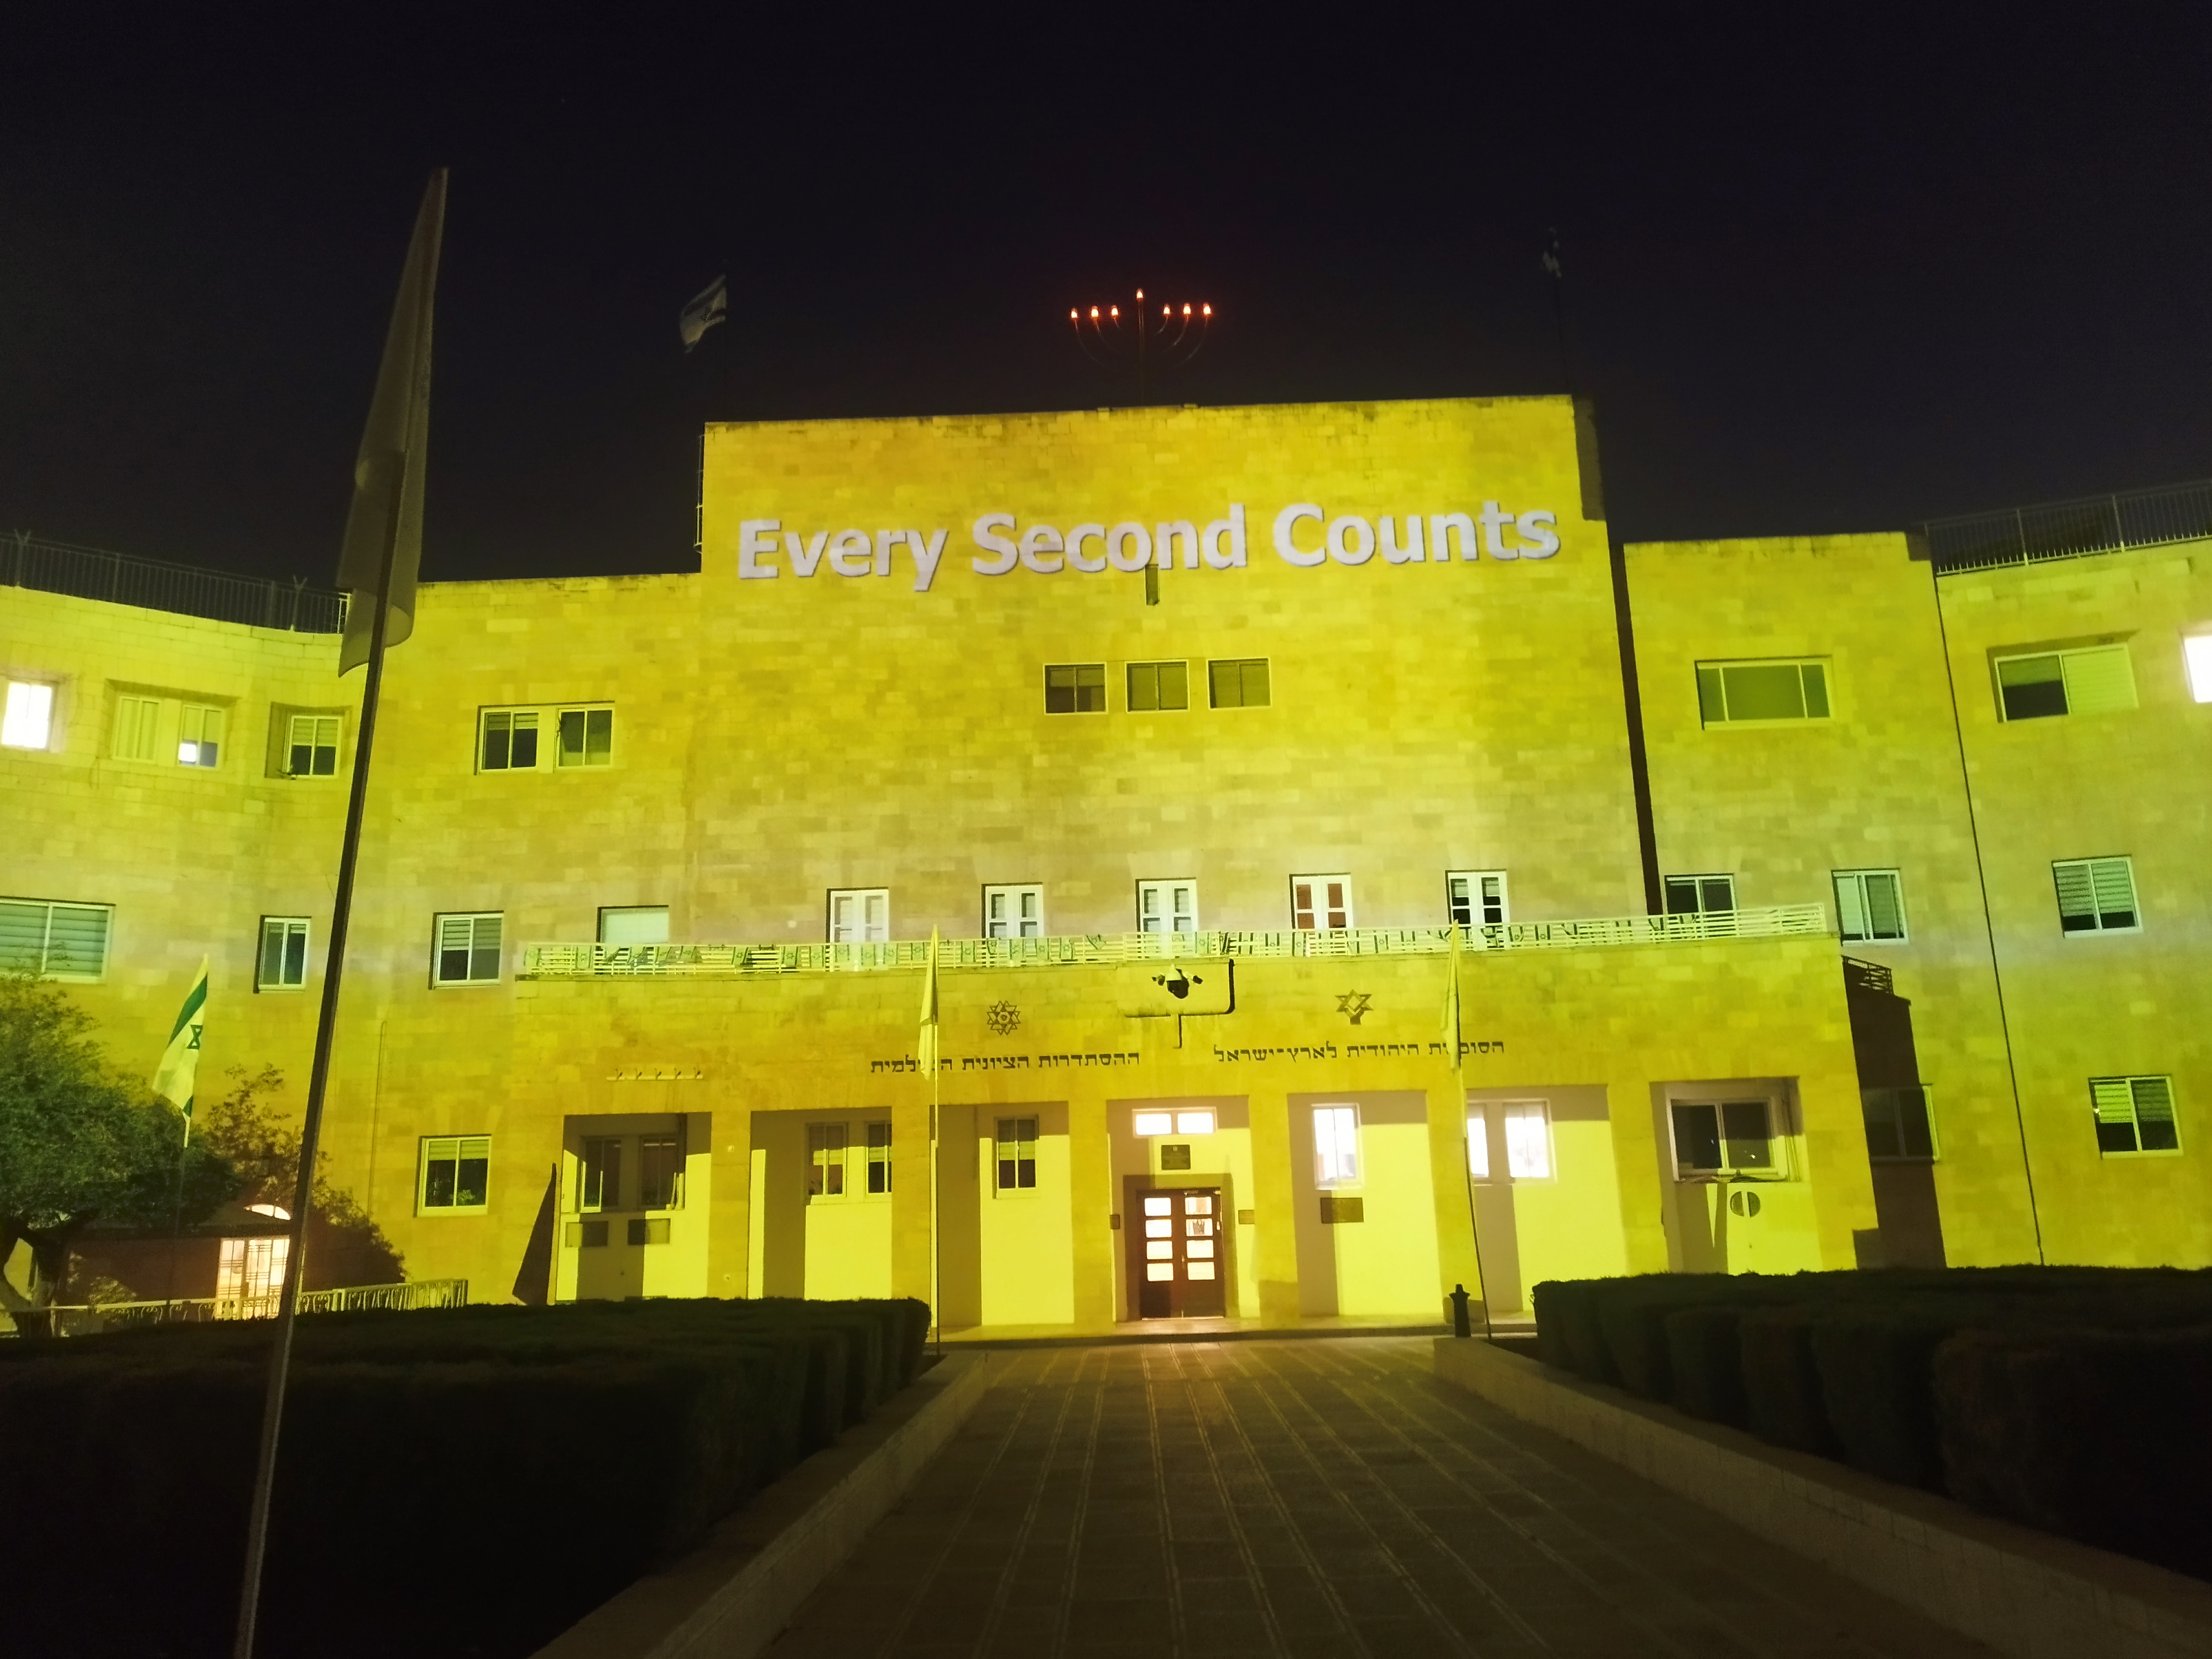 The National Institutions building is lit up in yellow